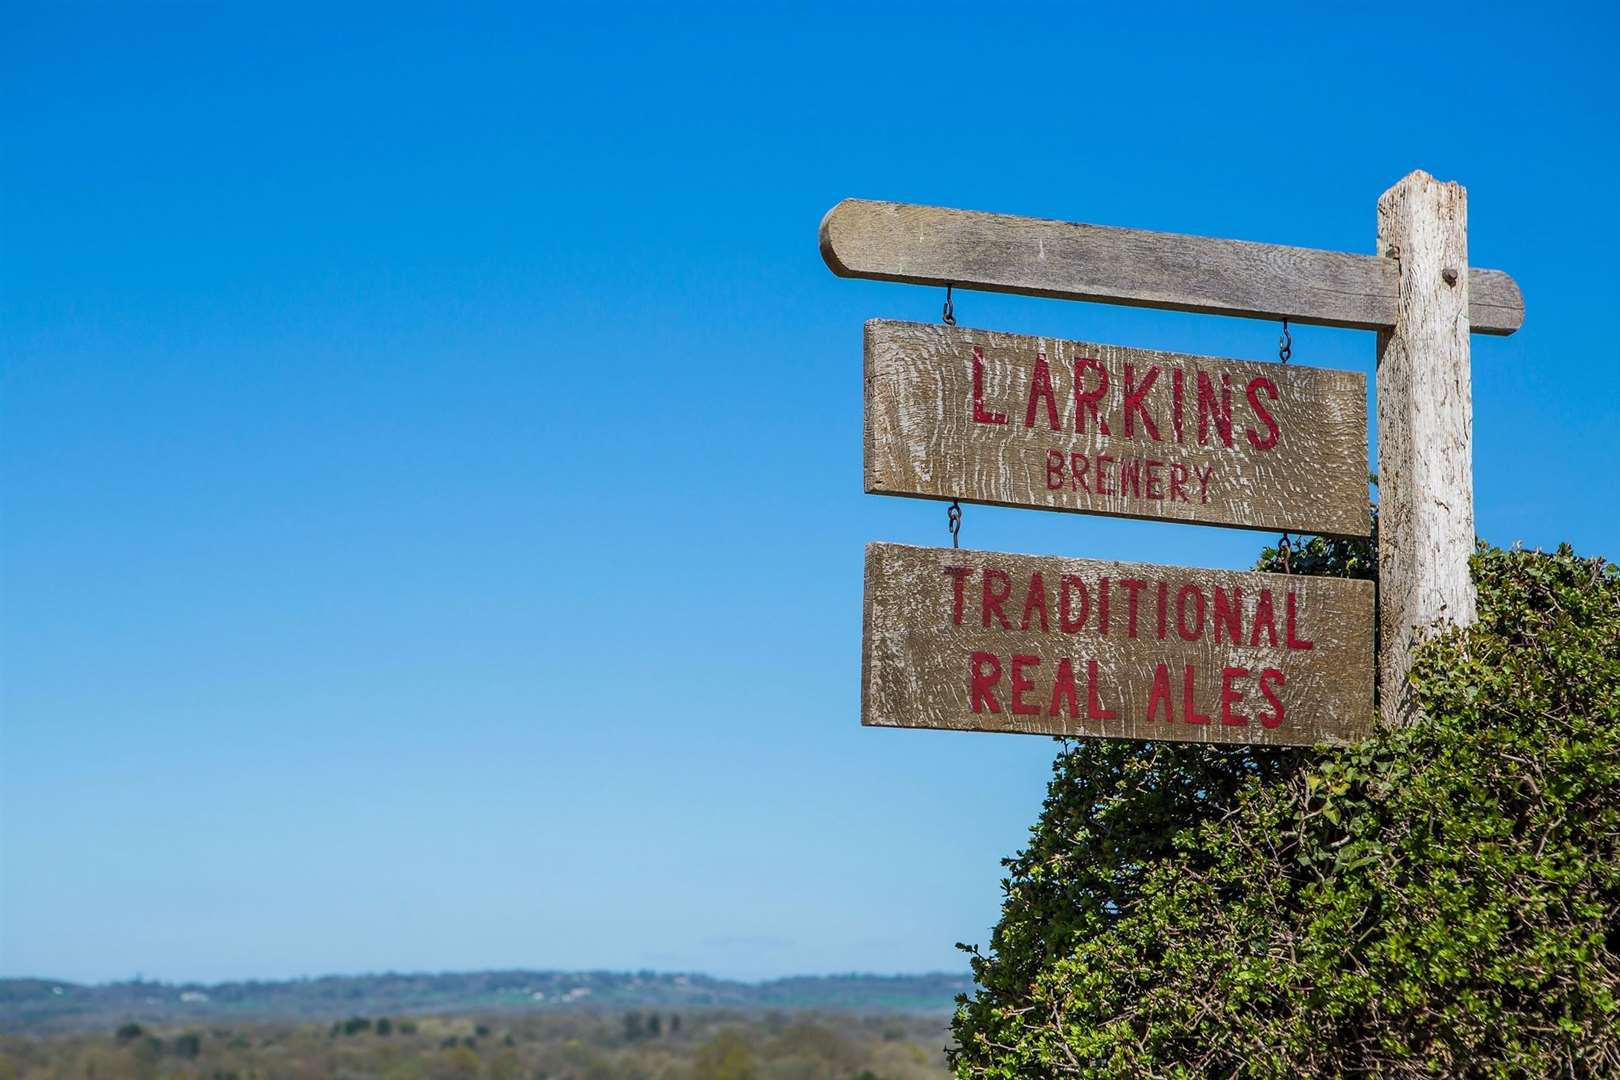 Bob Dockerty founded Larkins Brewery at Chiddingstone, Edenbridge, in 1986. Picture: Larkins Brewery